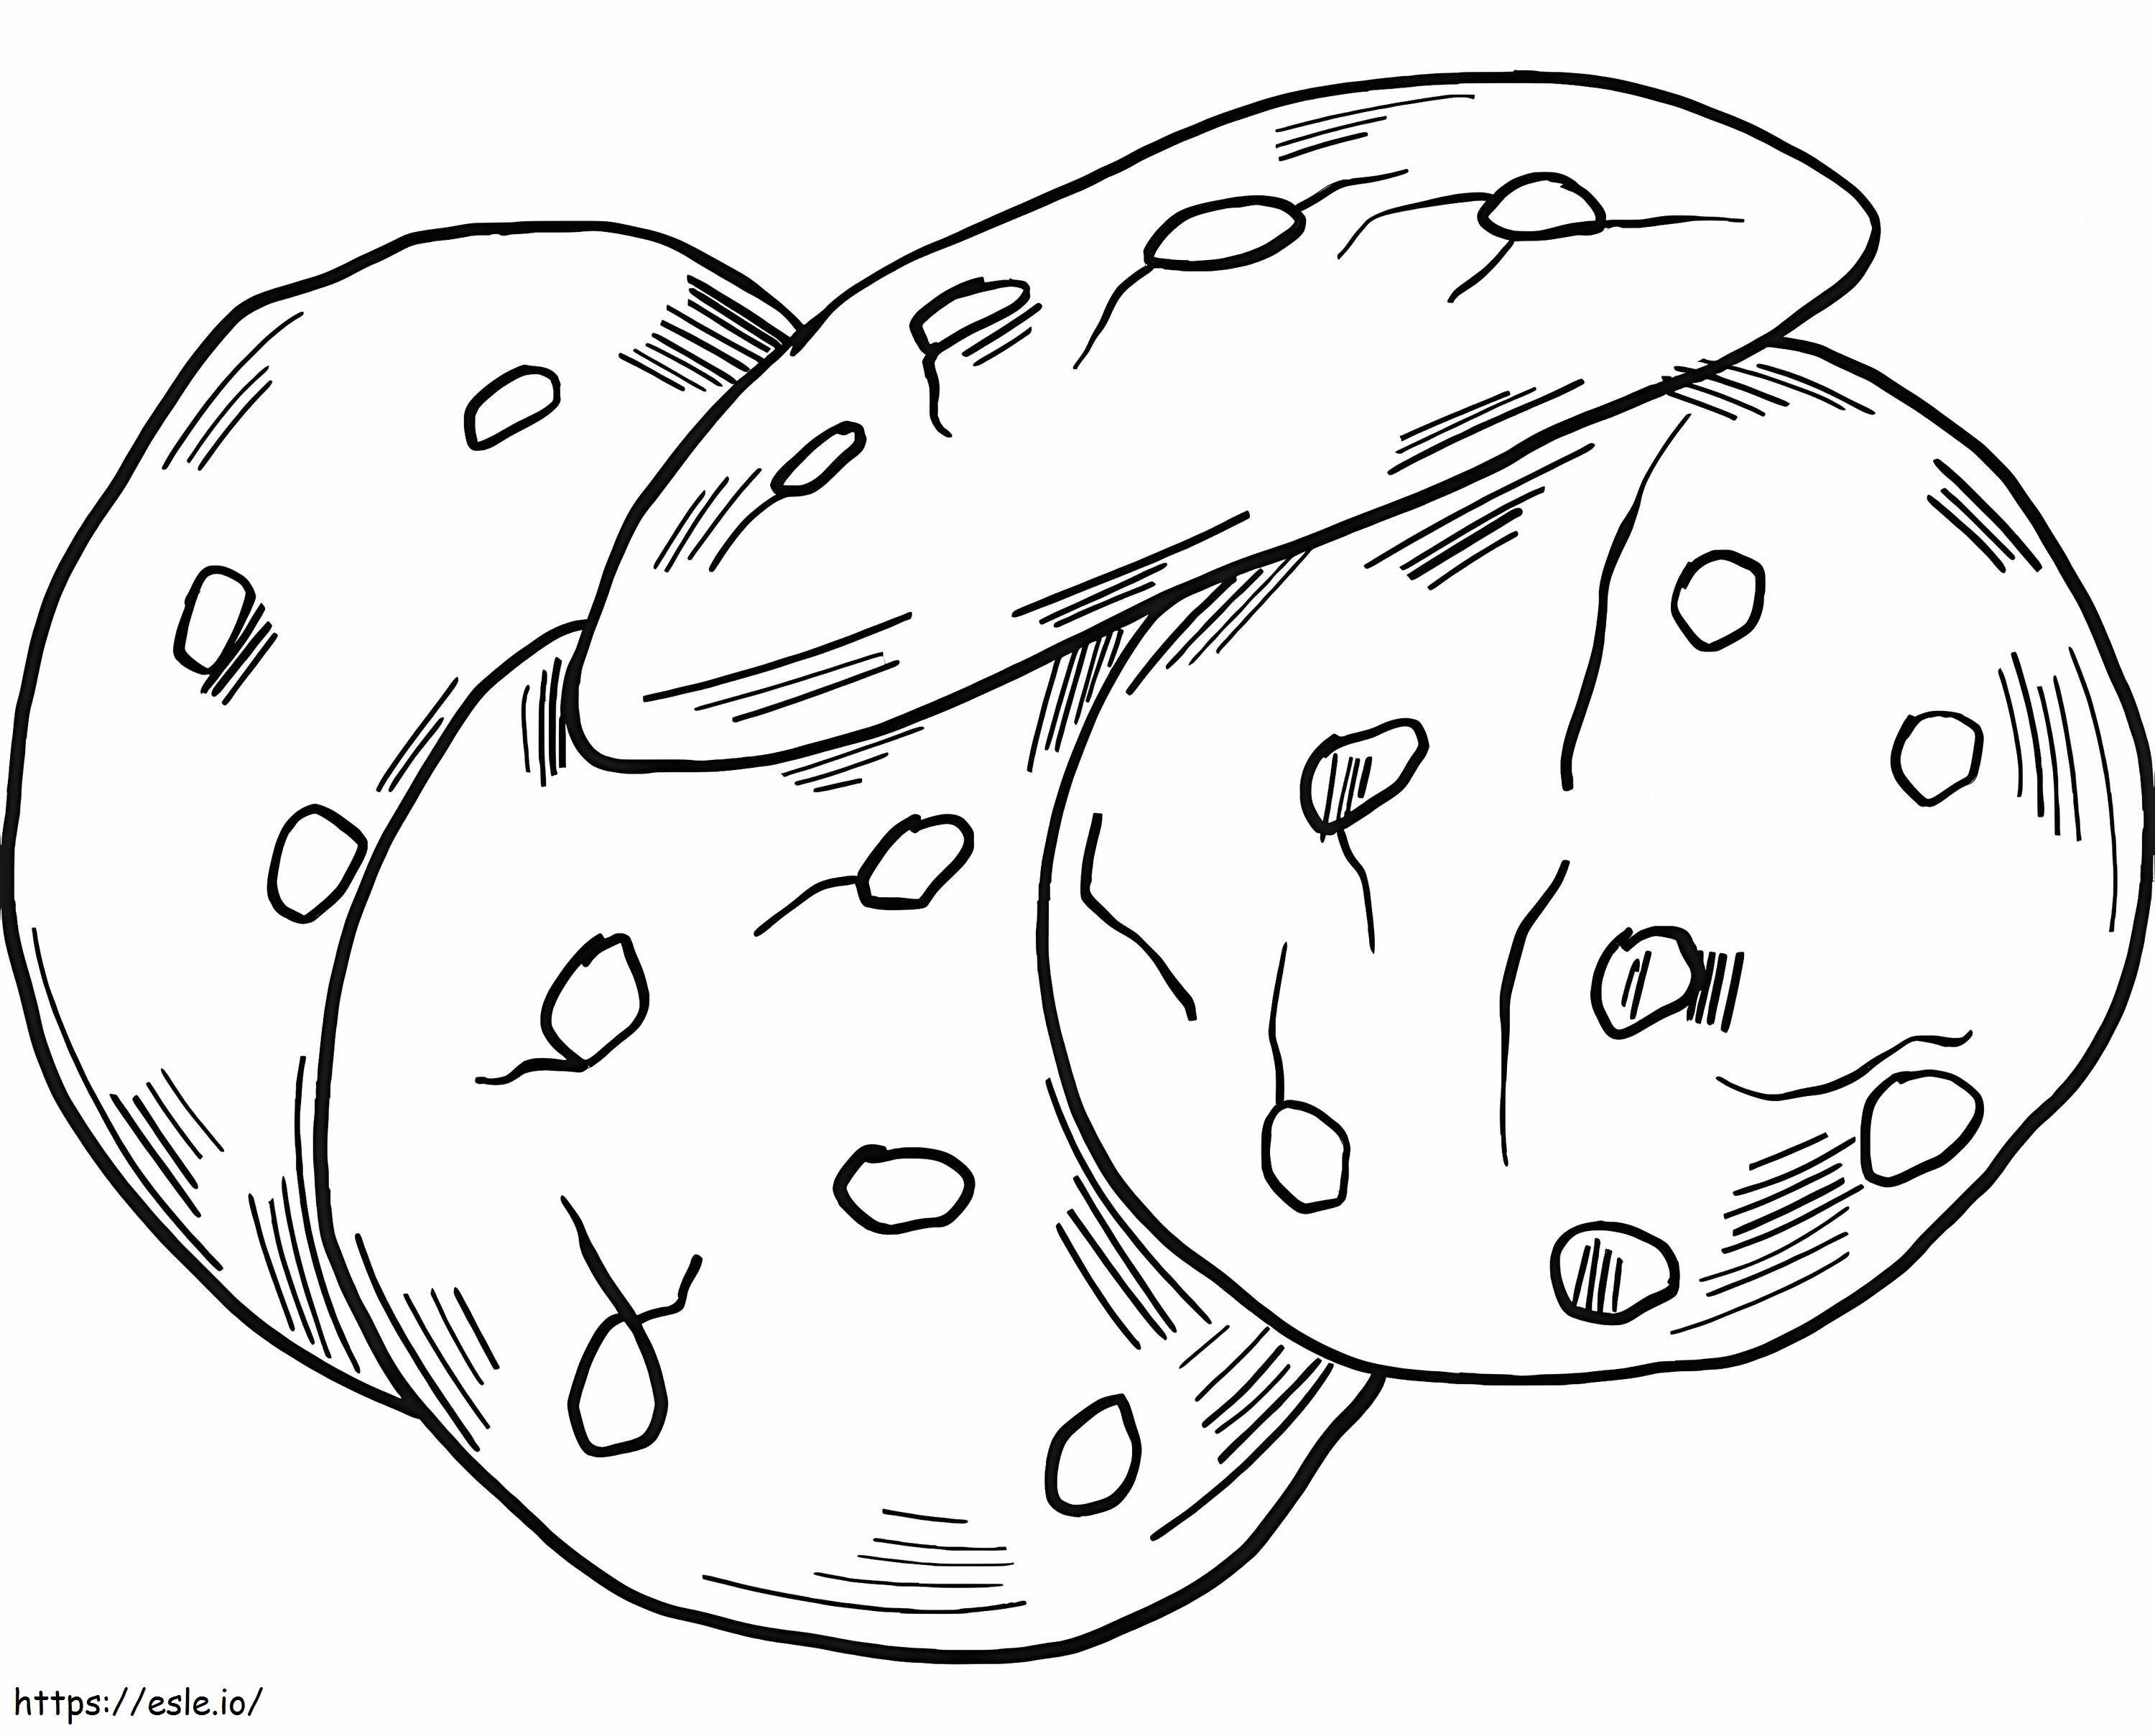 Four Cookies coloring page